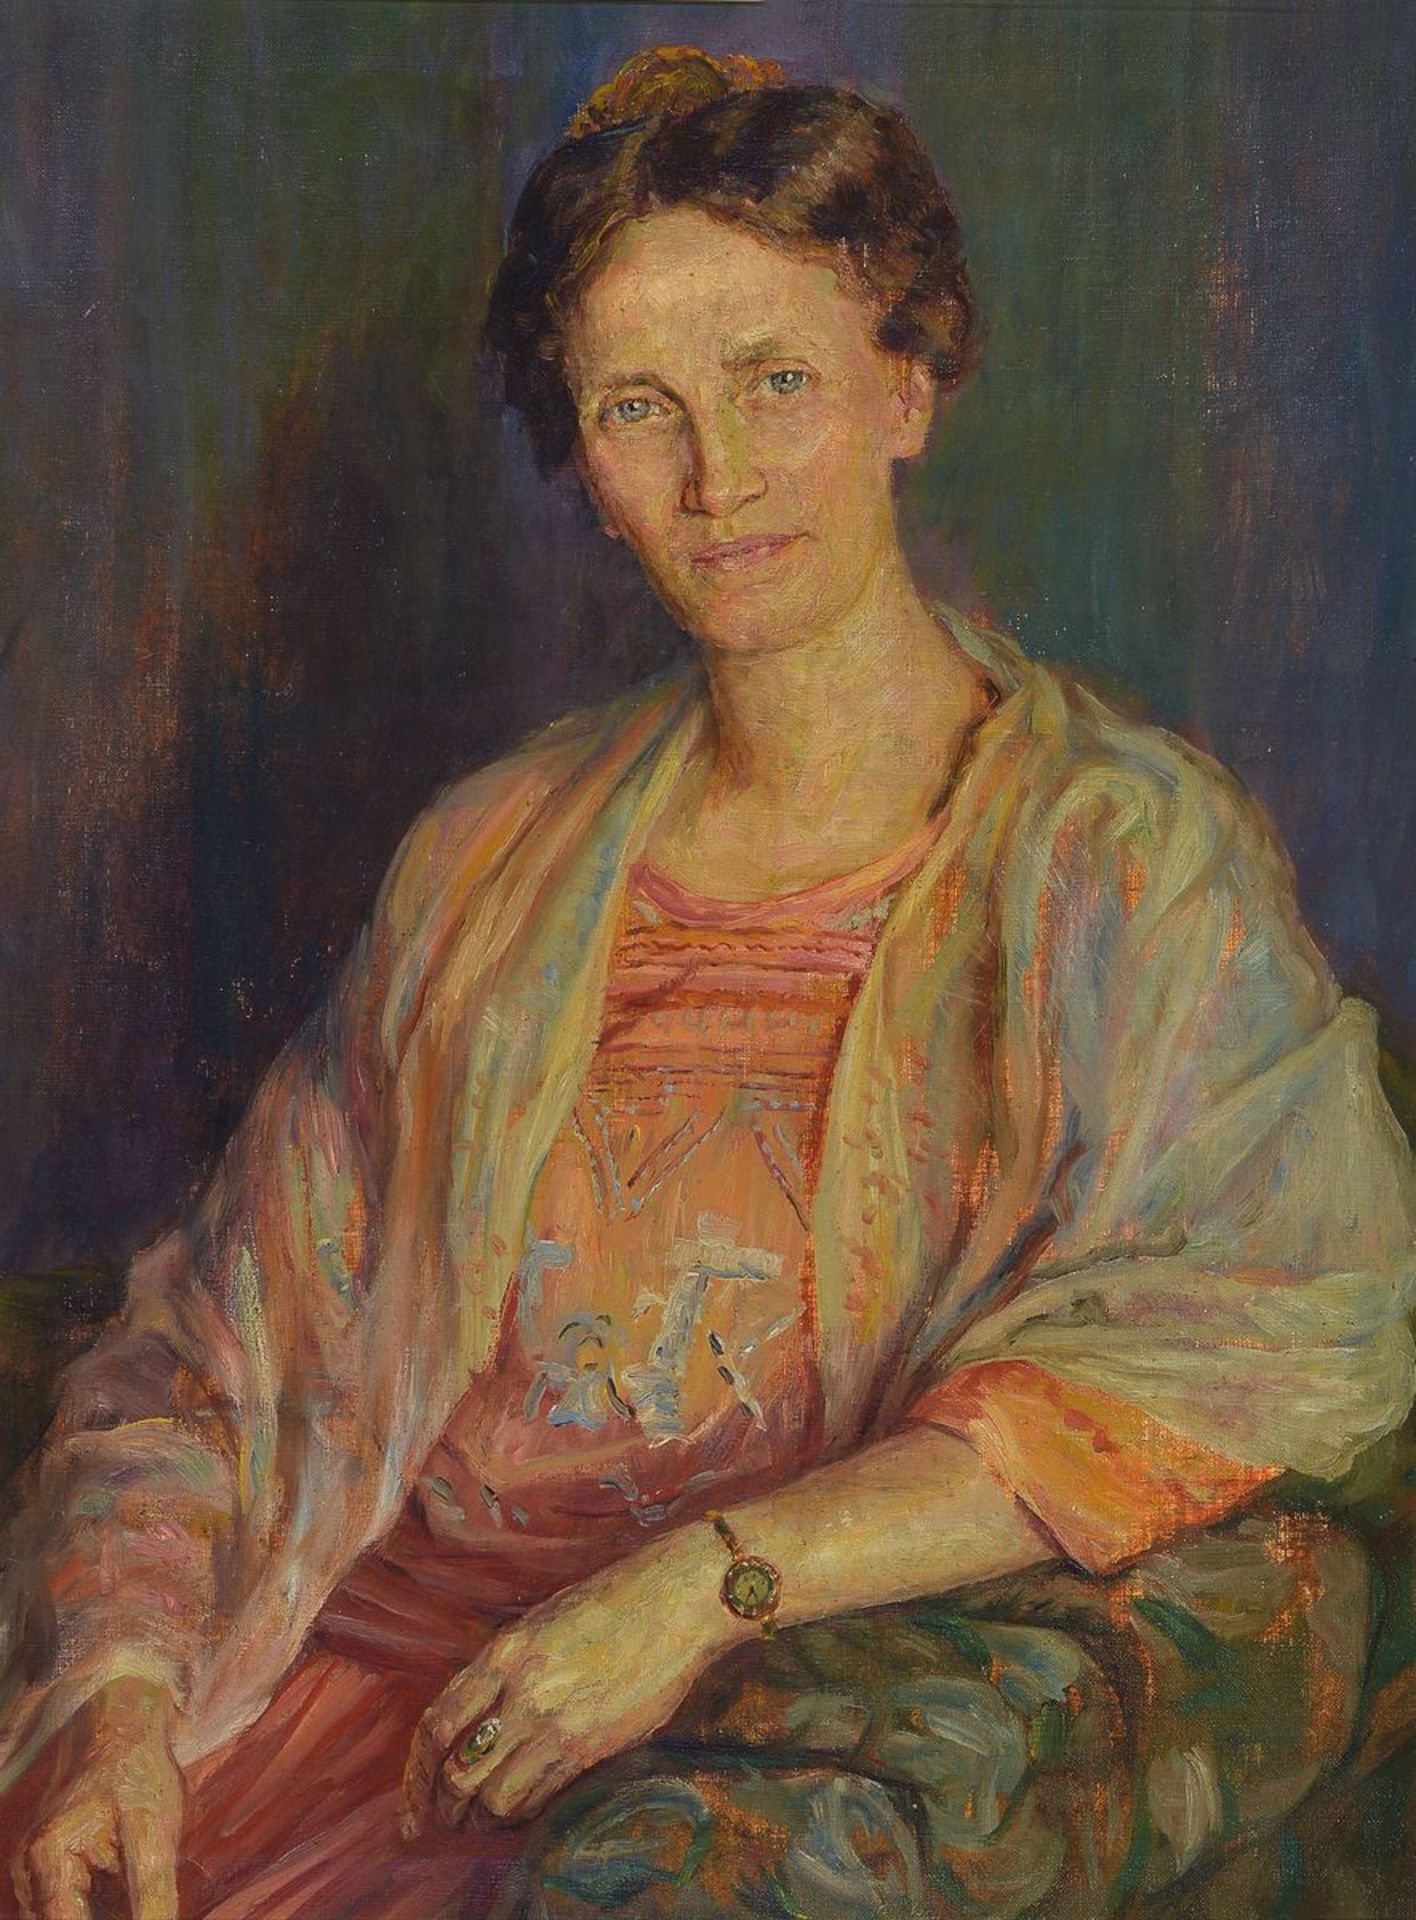 Munich portrait painter, 1920s / 30s, lady with wristwatch, high materiality,